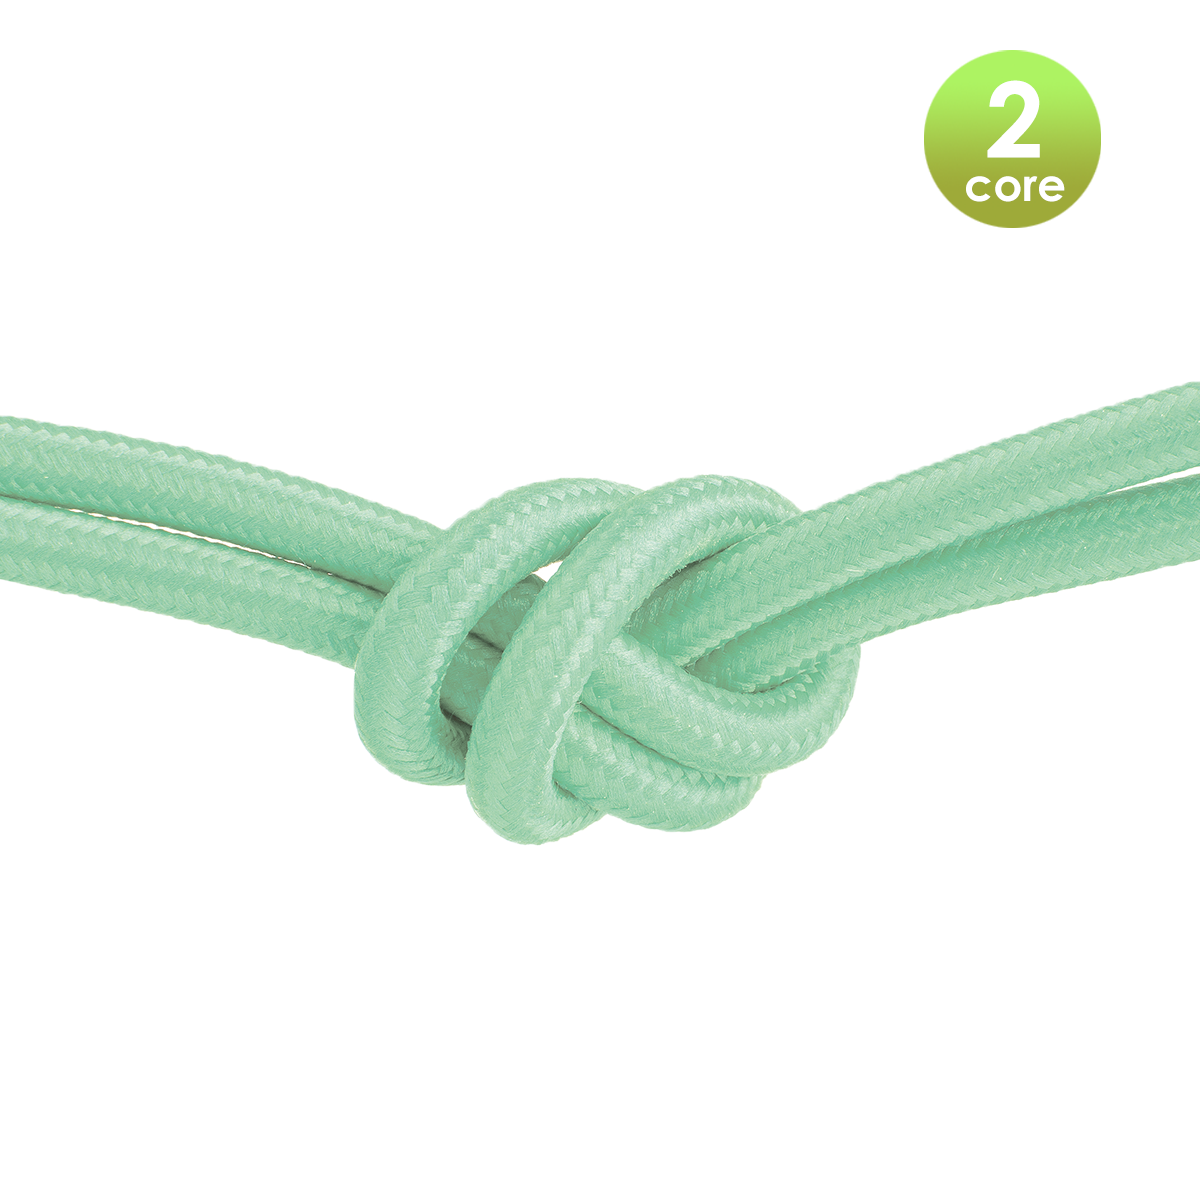 Tangla lighting - TLCB01001GN - Fabric cable 2 core - in pale green